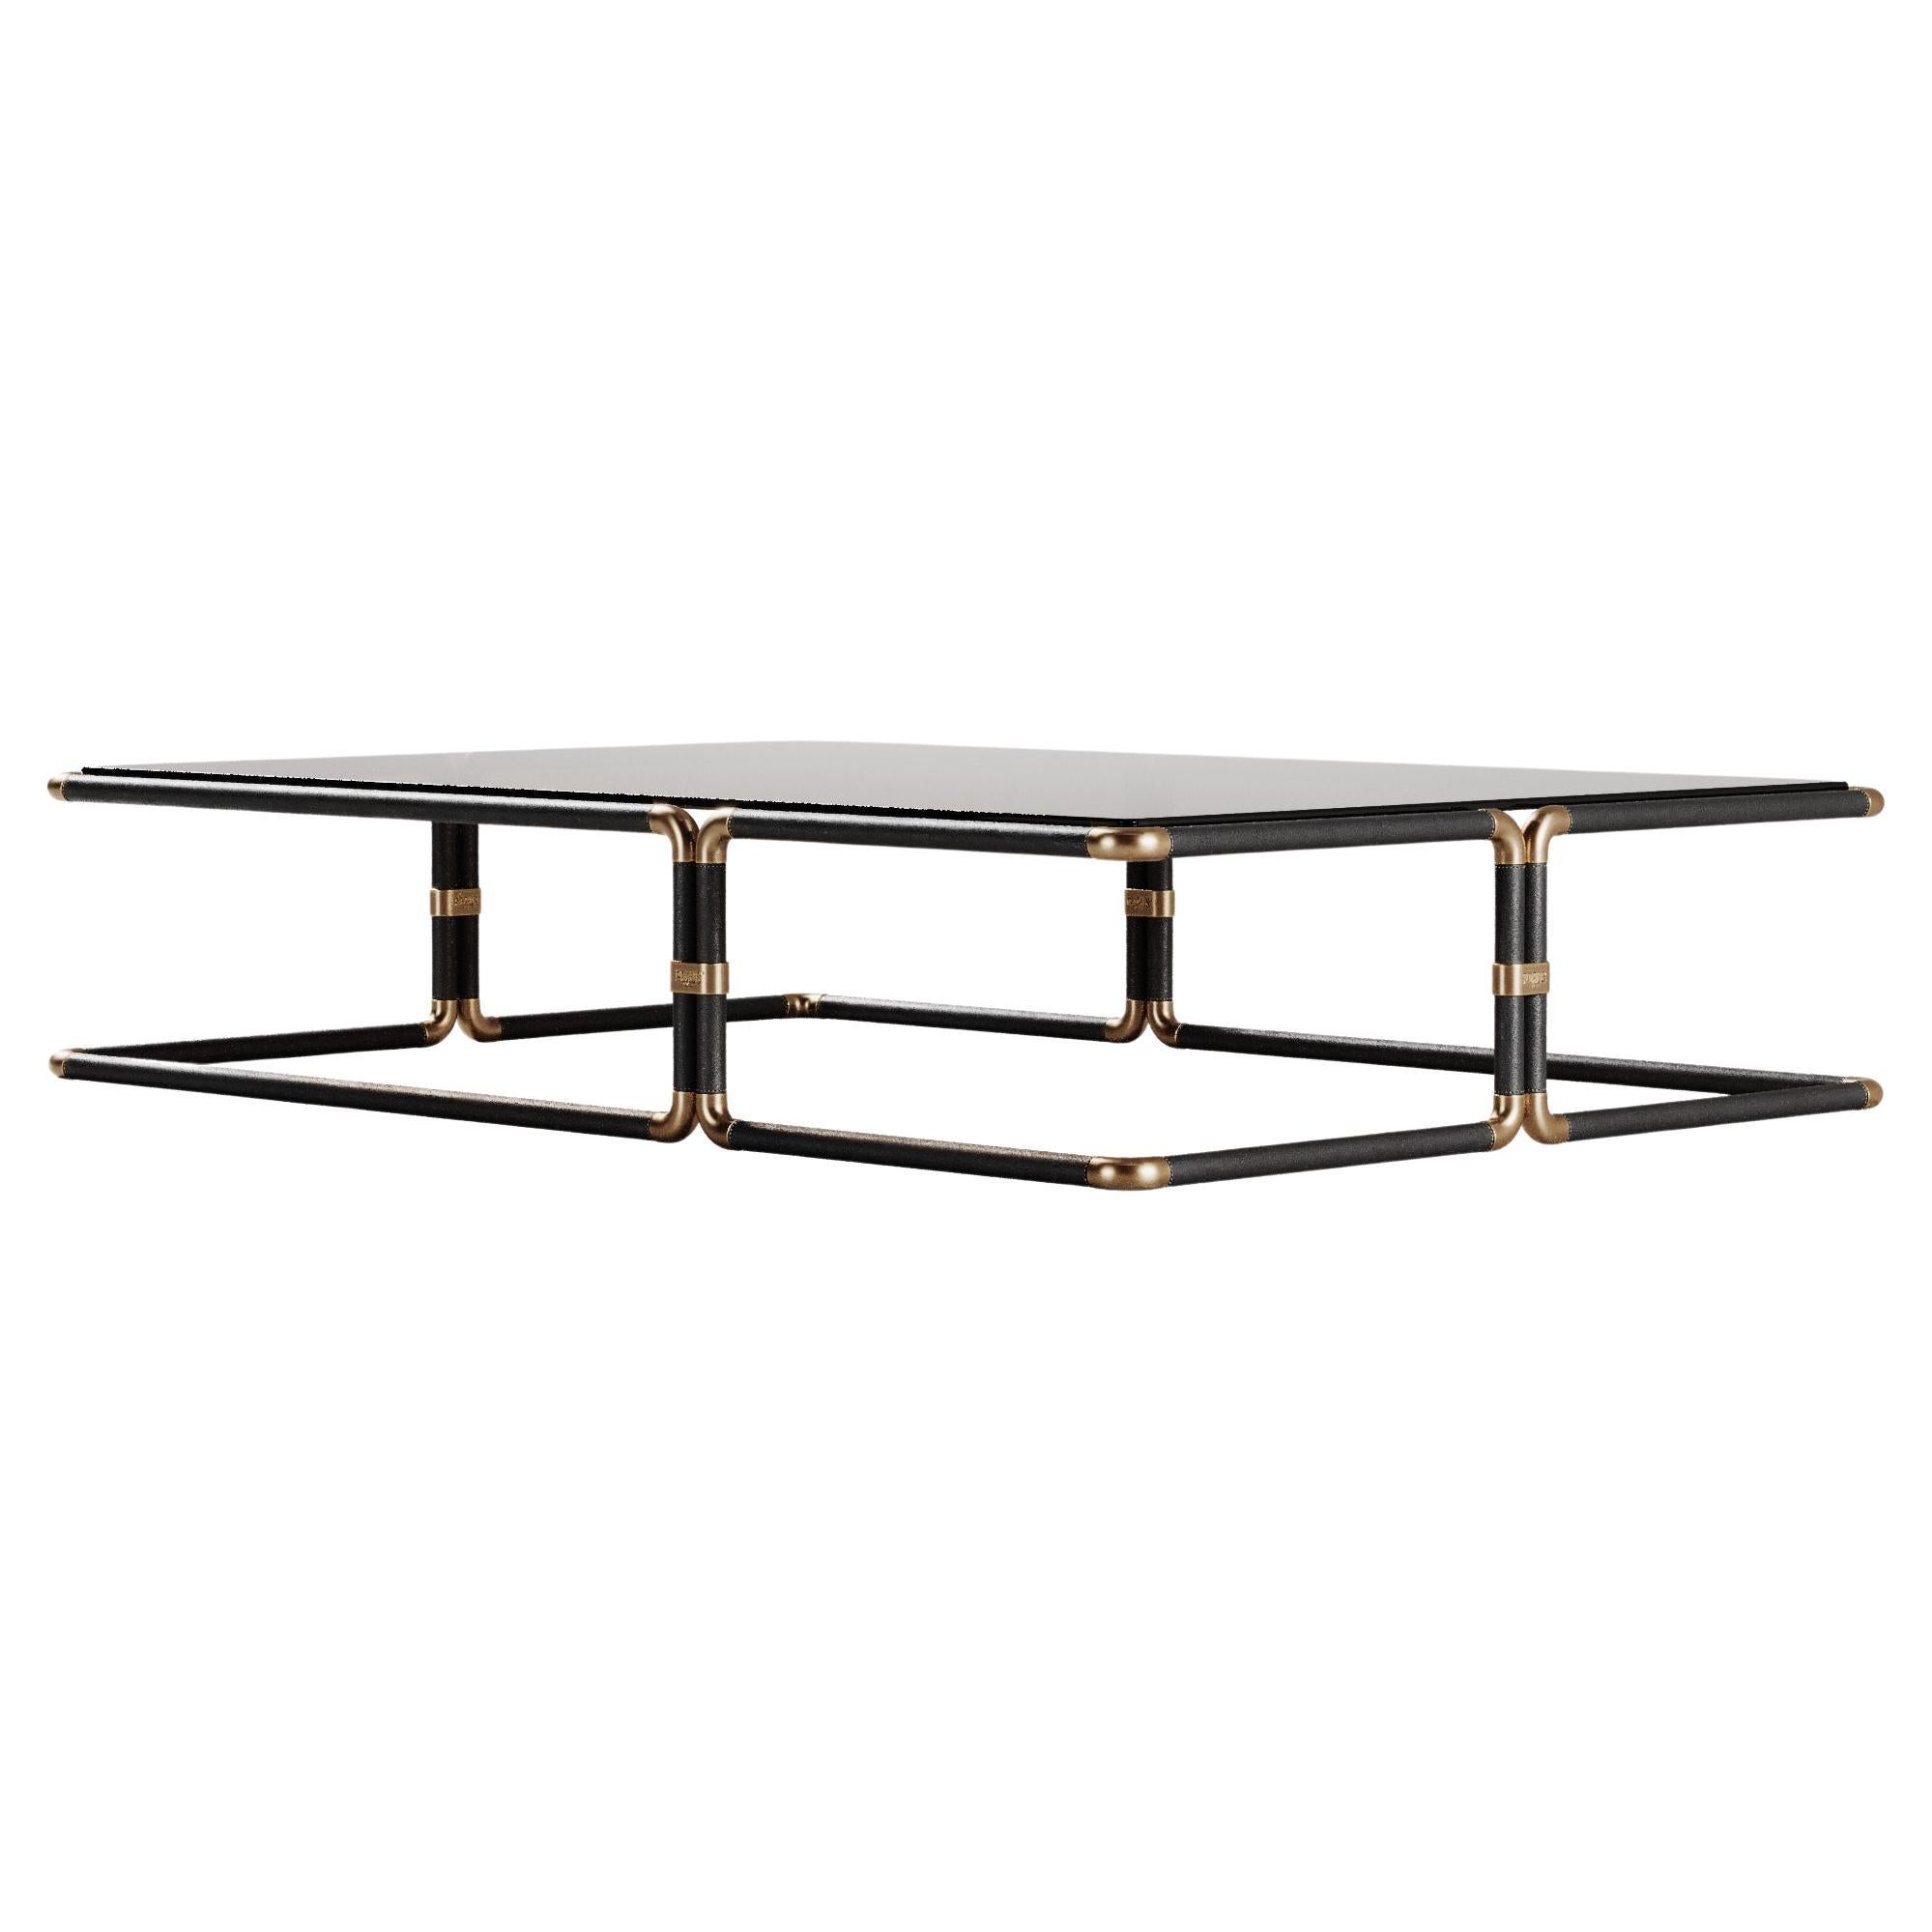 21st Century Dickson Center Table Aged Brushed Brass and Bronze Glass by Porus